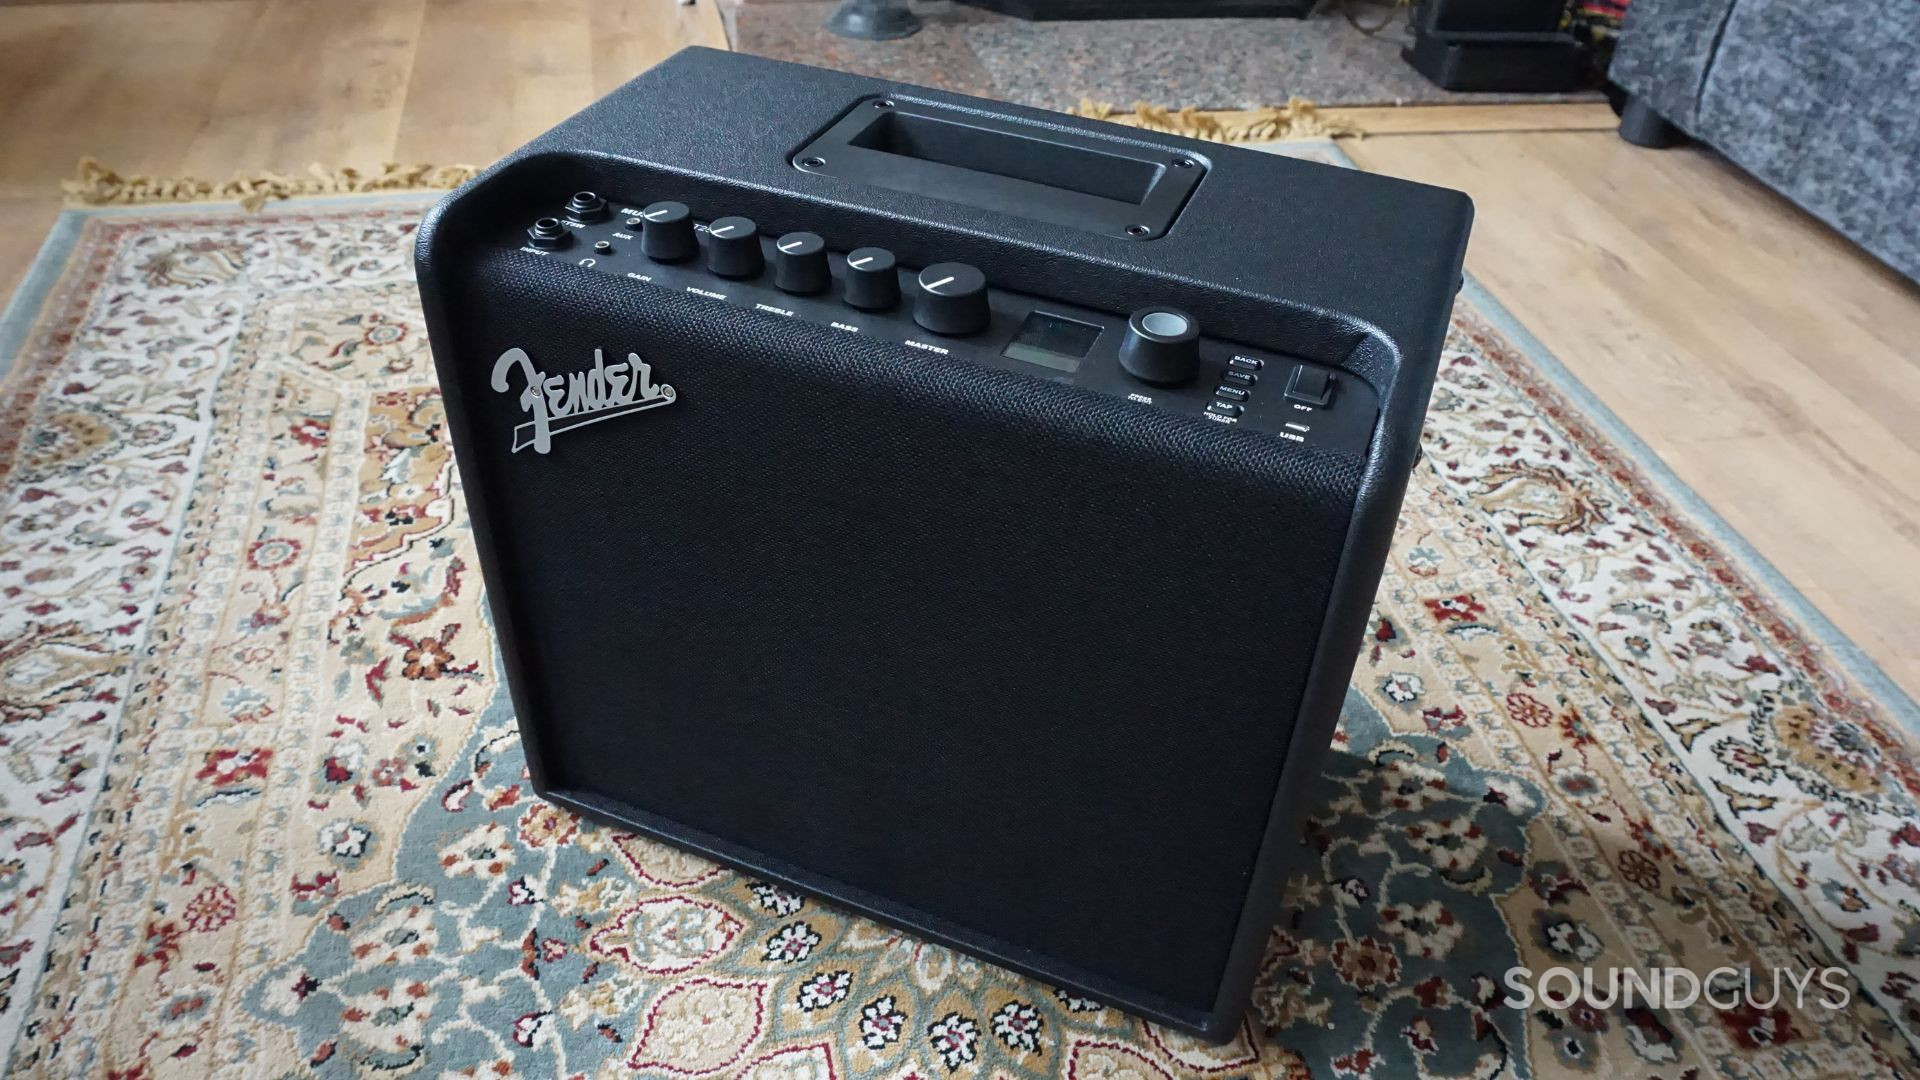 The Fender Mustang LT25 has an output power of 25 watts